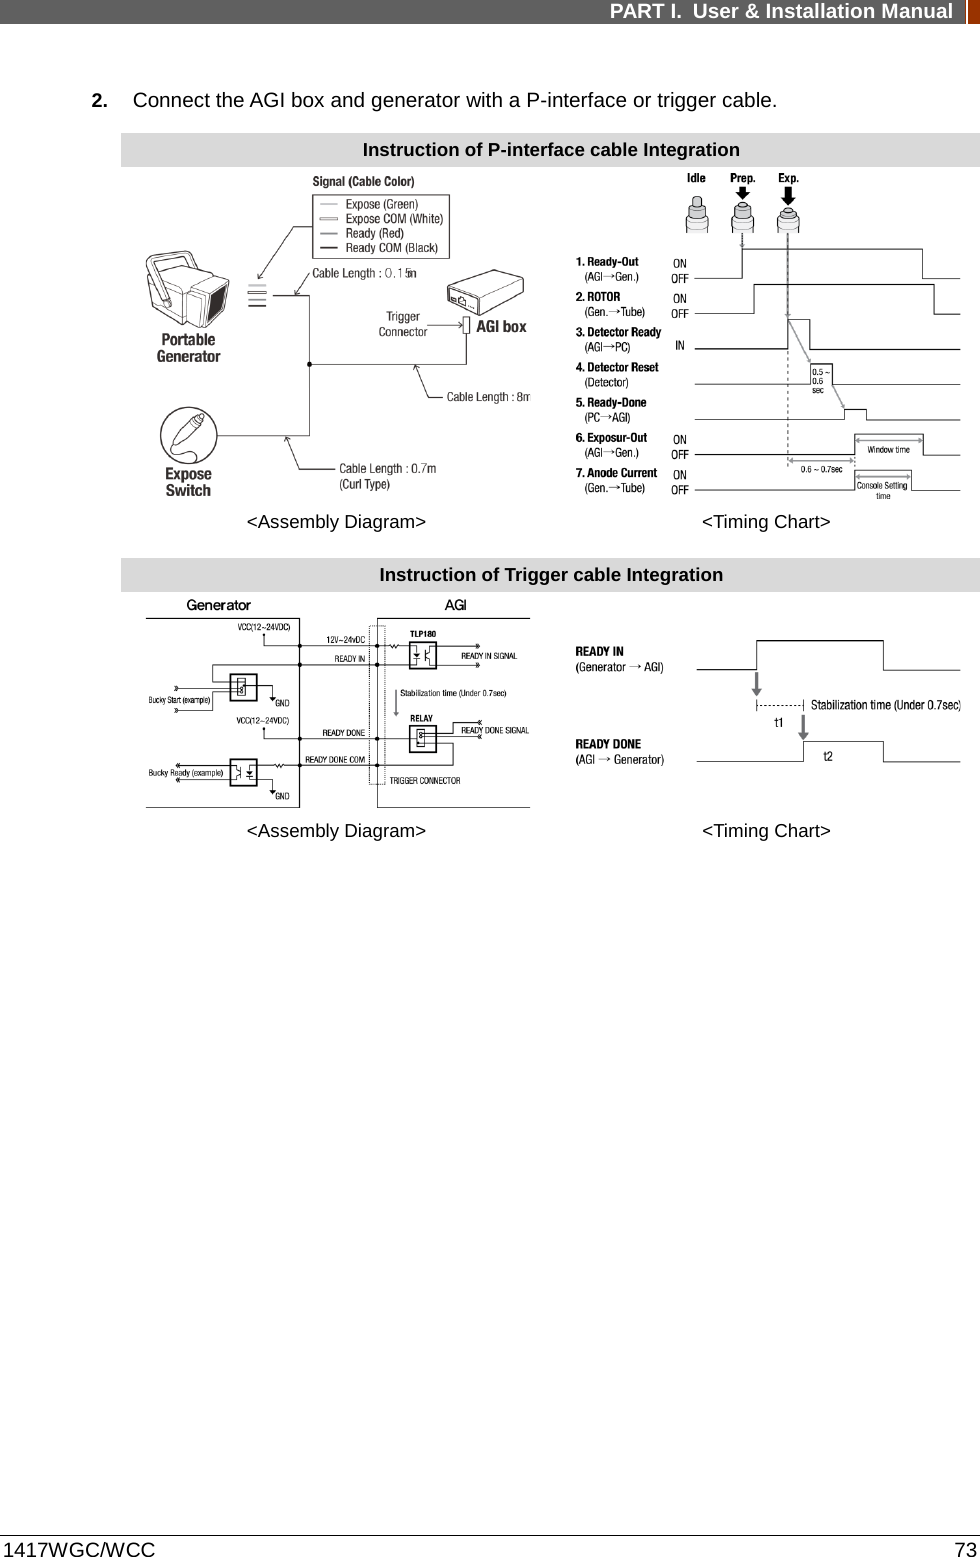 PART I. User &amp; Installation Manual  1417WGC/WCC 73 2. Connect the AGI box and generator with a P-interface or trigger cable. Instruction of P-interface cable Integration   &lt;Assembly Diagram&gt; &lt;Timing Chart&gt;  Instruction of Trigger cable Integration   &lt;Assembly Diagram&gt; &lt;Timing Chart&gt;    